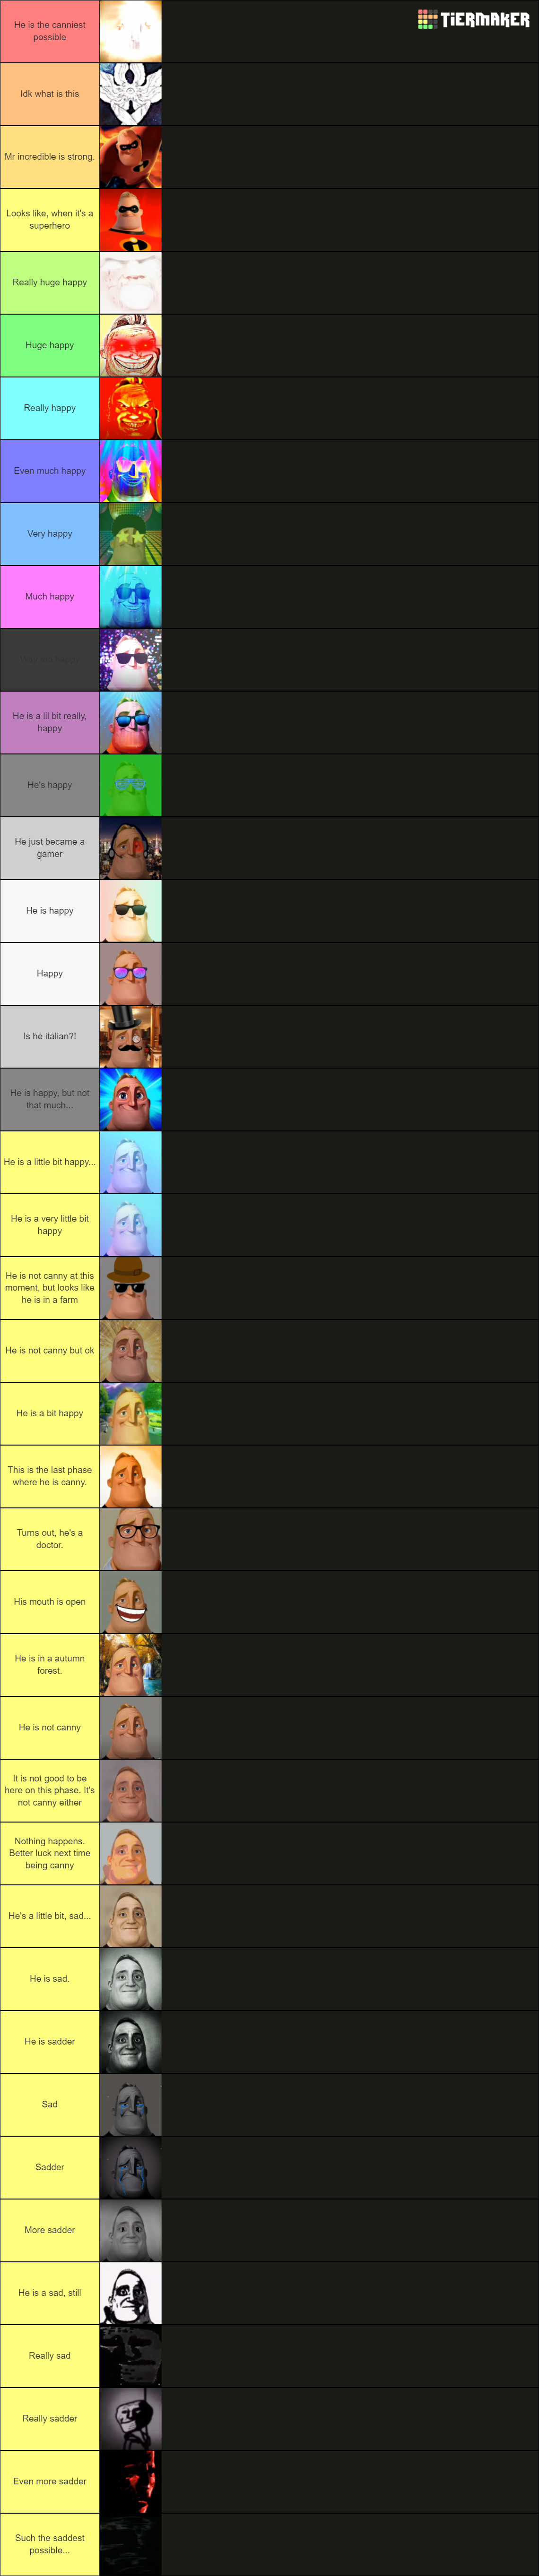 mr-incredible-becoming-uncanny-mega-extended-tier-list-community